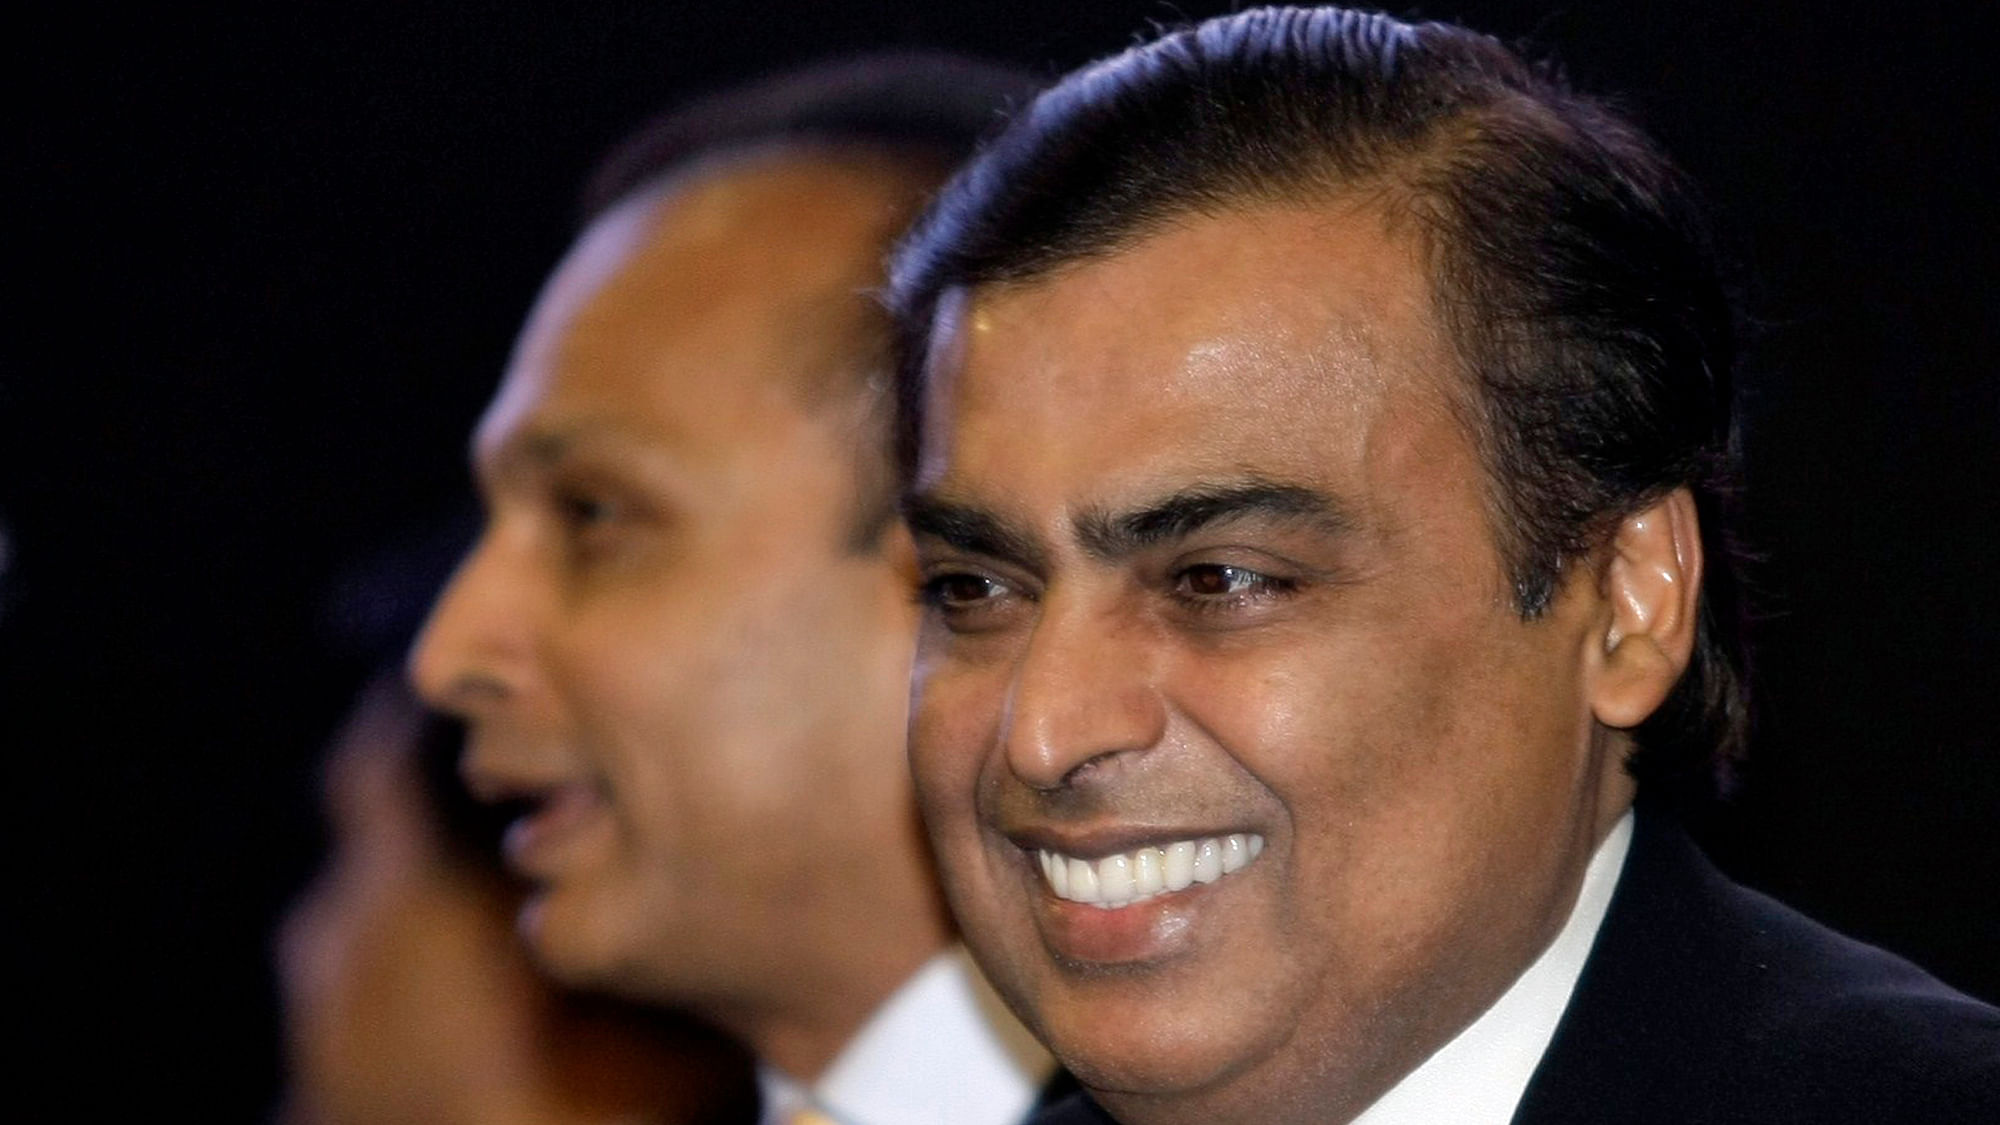 The Ambanis’ net worth, which combines the wealth of both brothers, Mukesh and Anil, has been estimated at $21.5 billion. (Photo: Reuters)